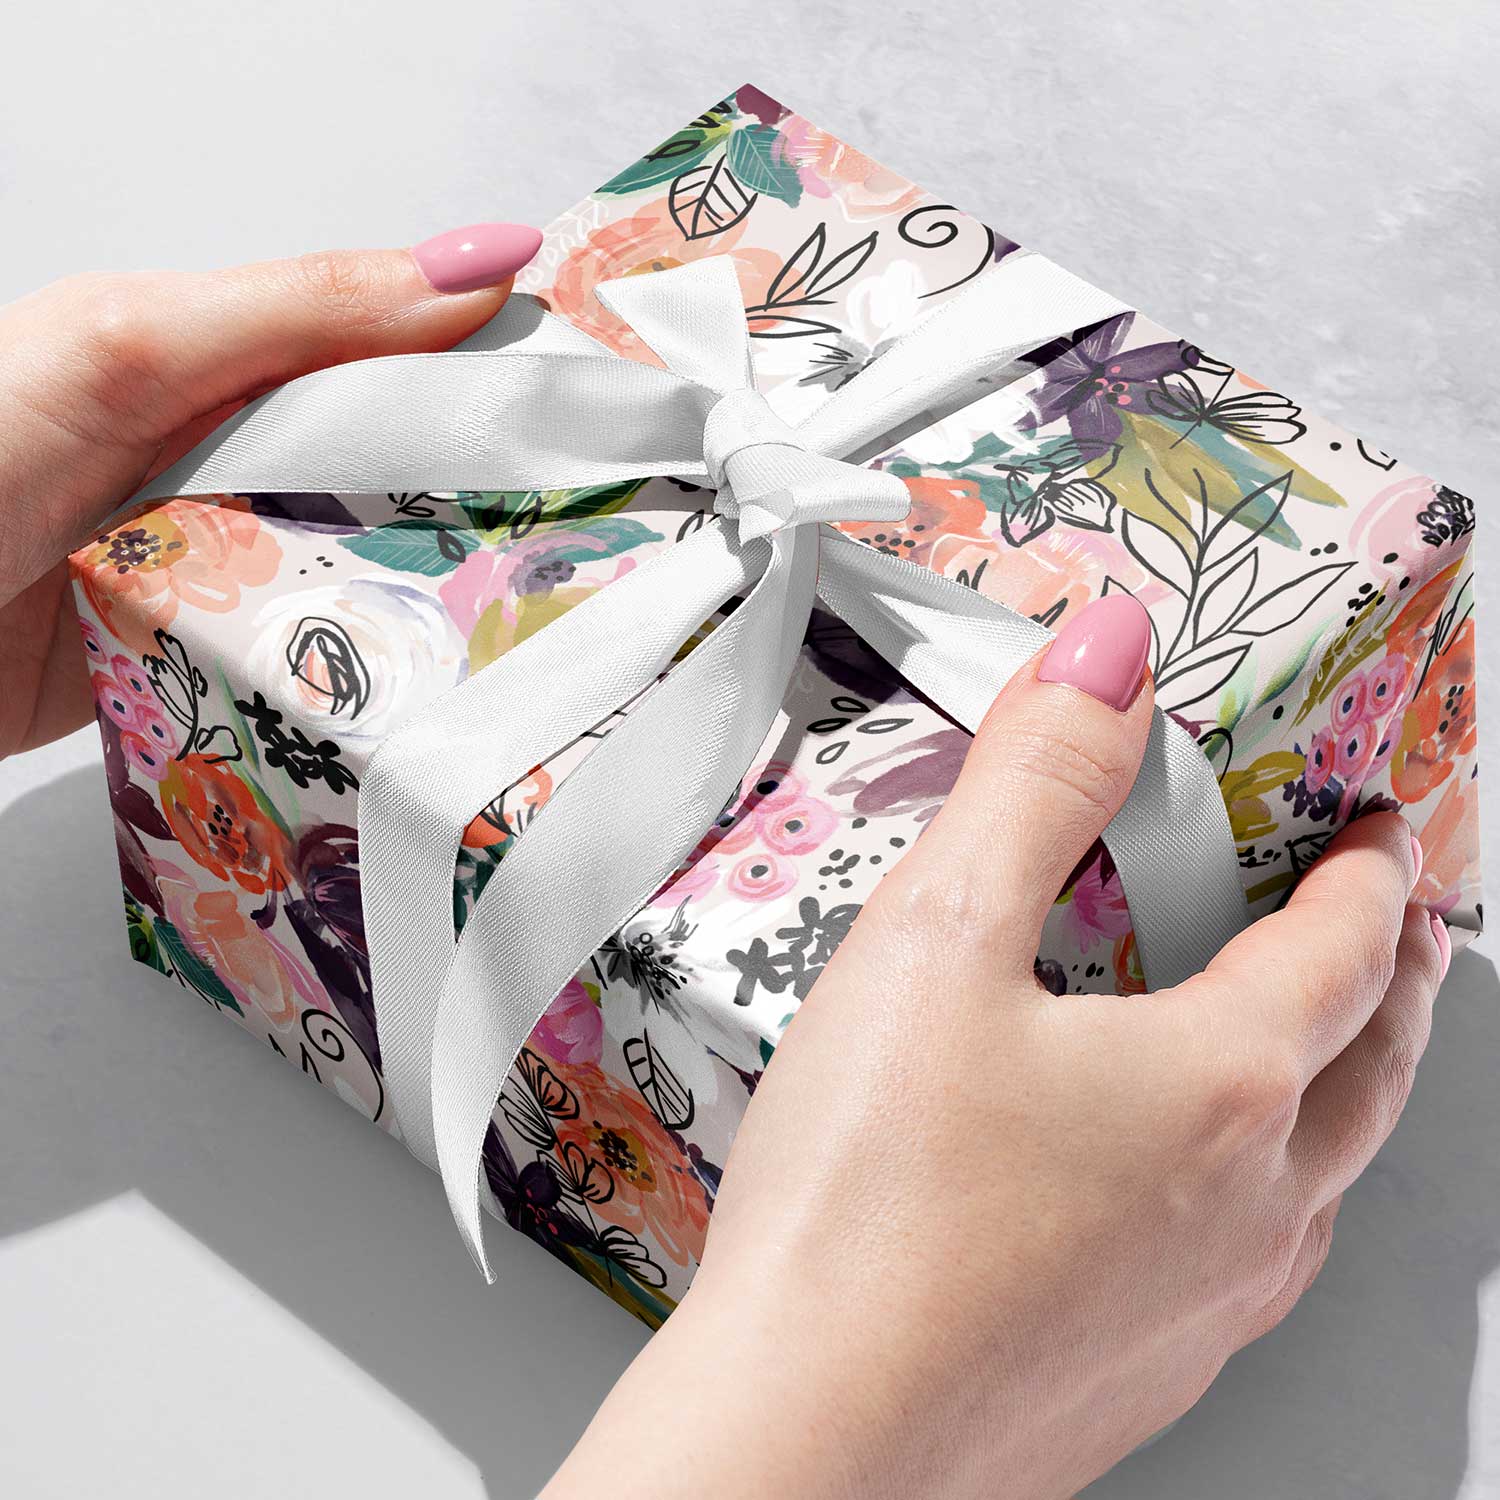 Drifting Blossoms Floral Gift Wrap Full Ream 833 ft x 30 in